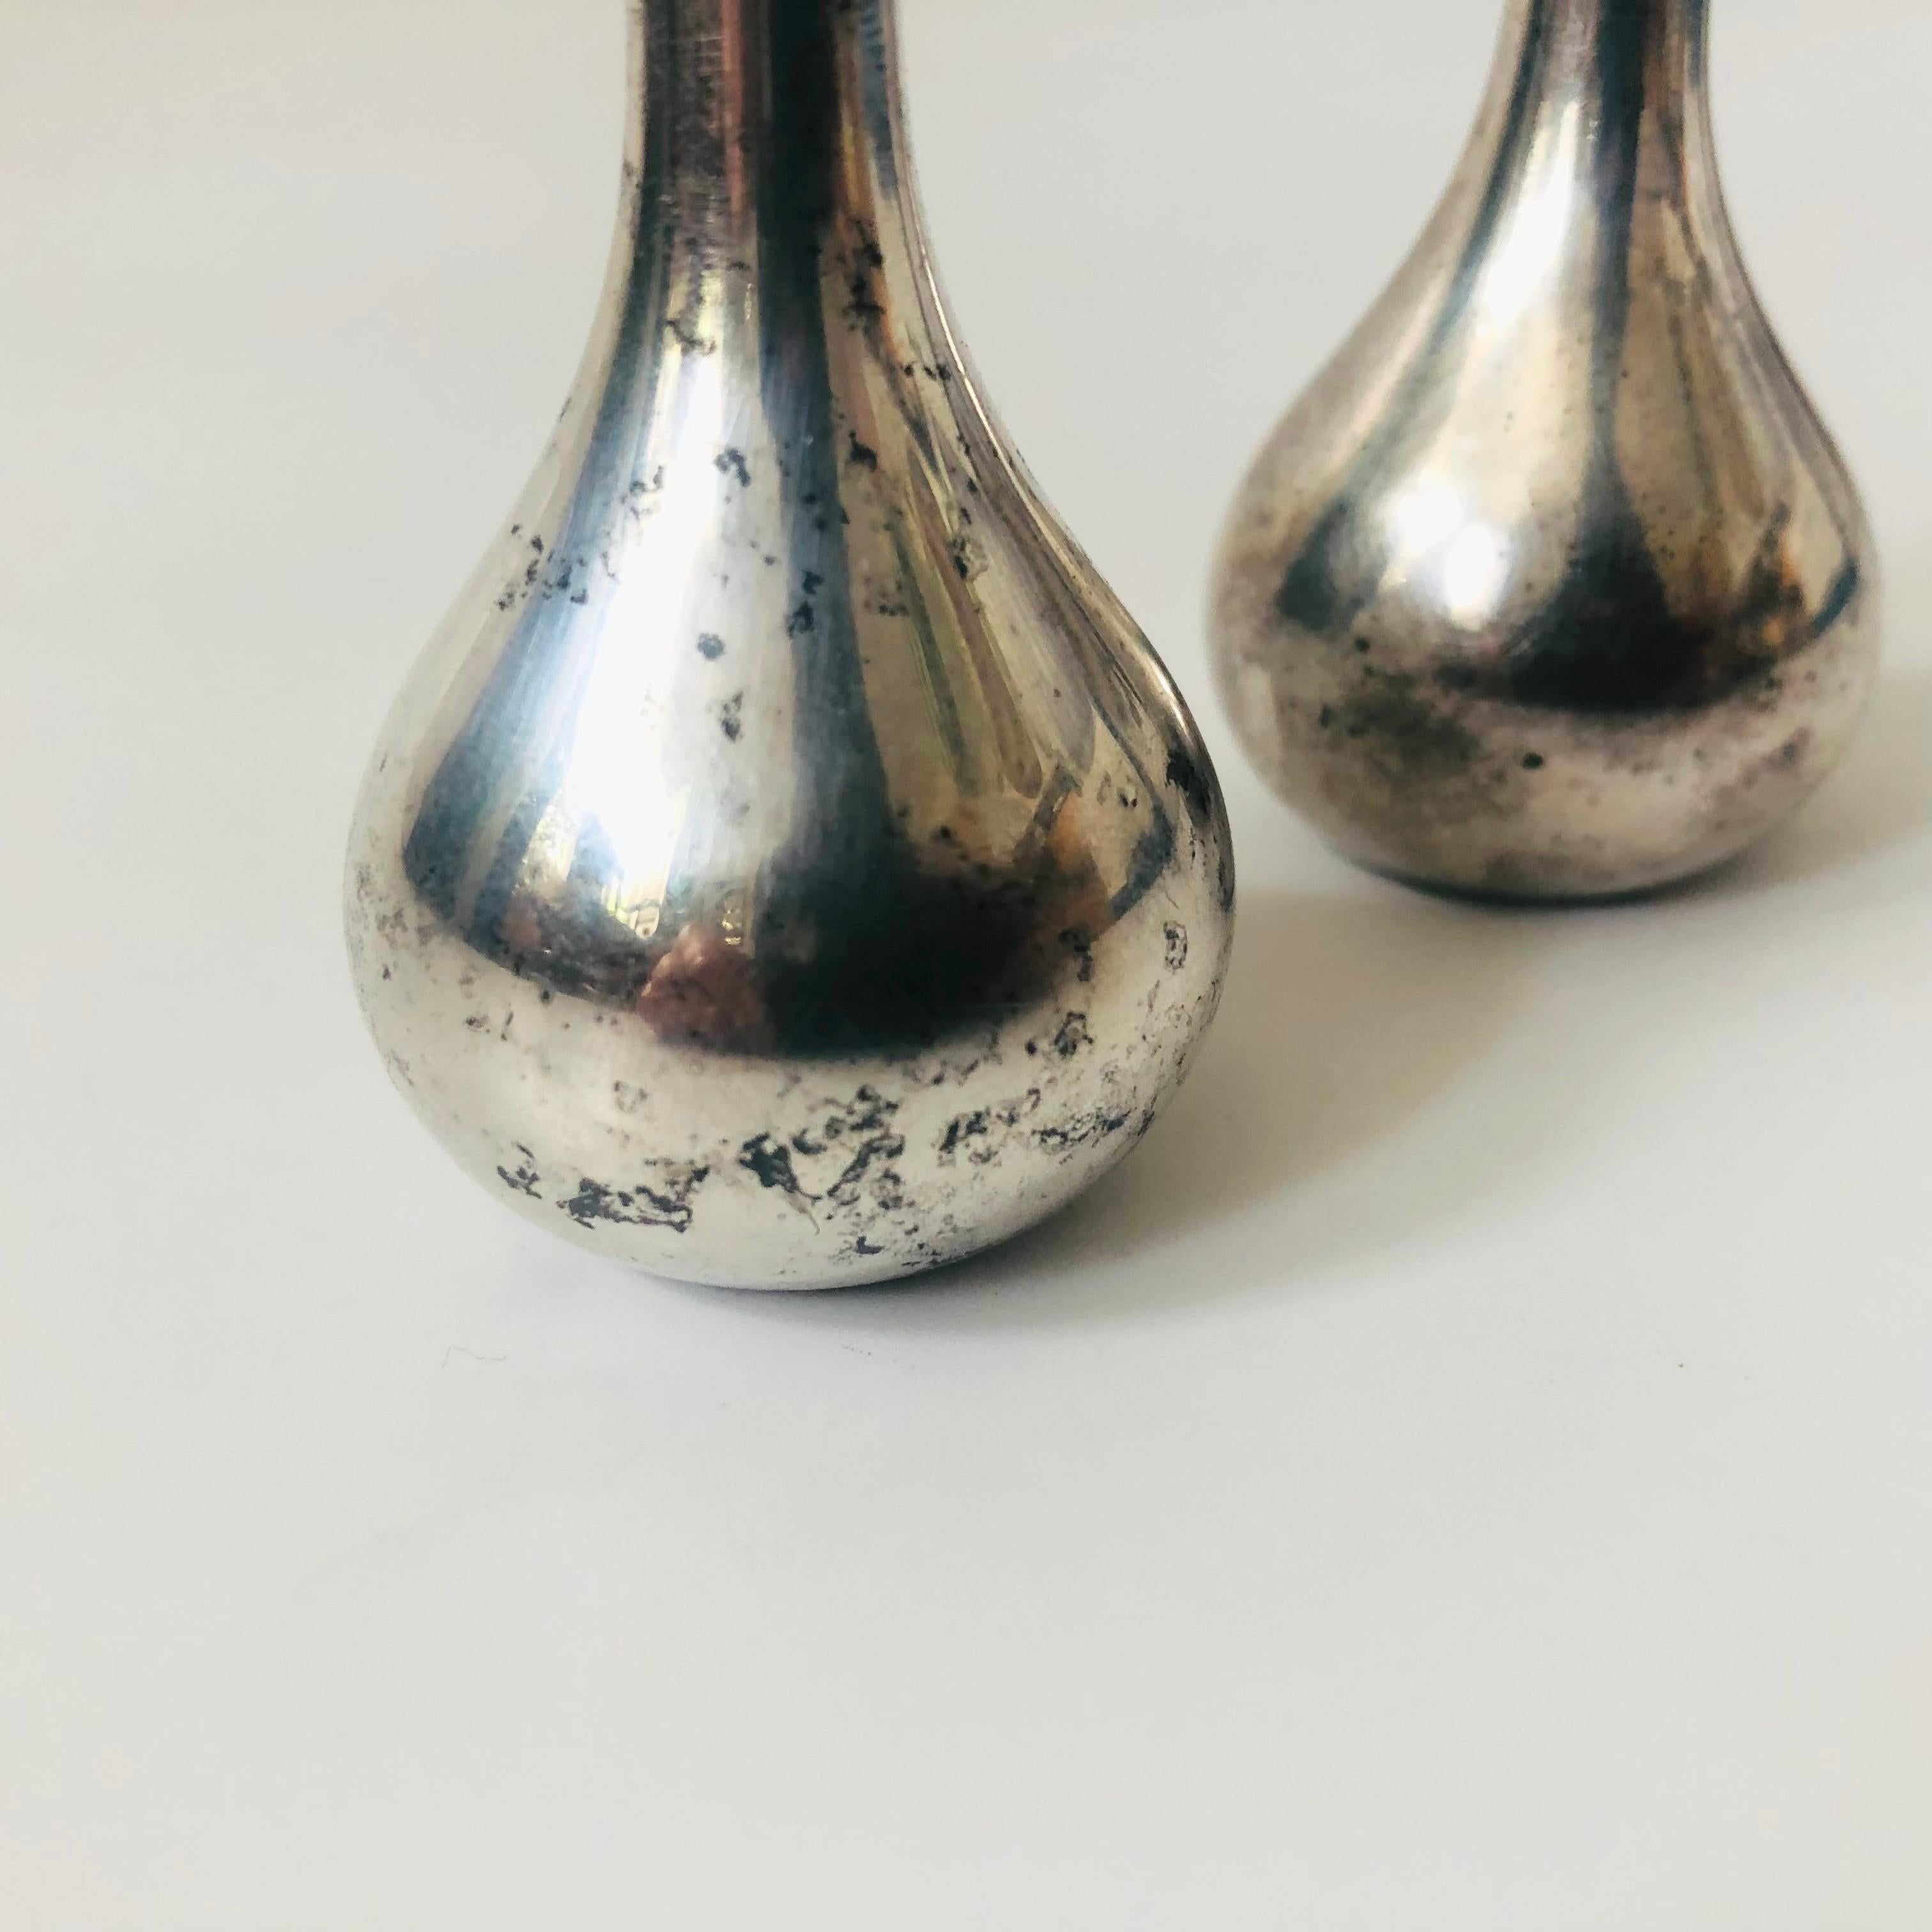 Metal Dansk Silver Onion Tiny Taper Candle Holders by Jens Quistgaard - Set of 2 For Sale